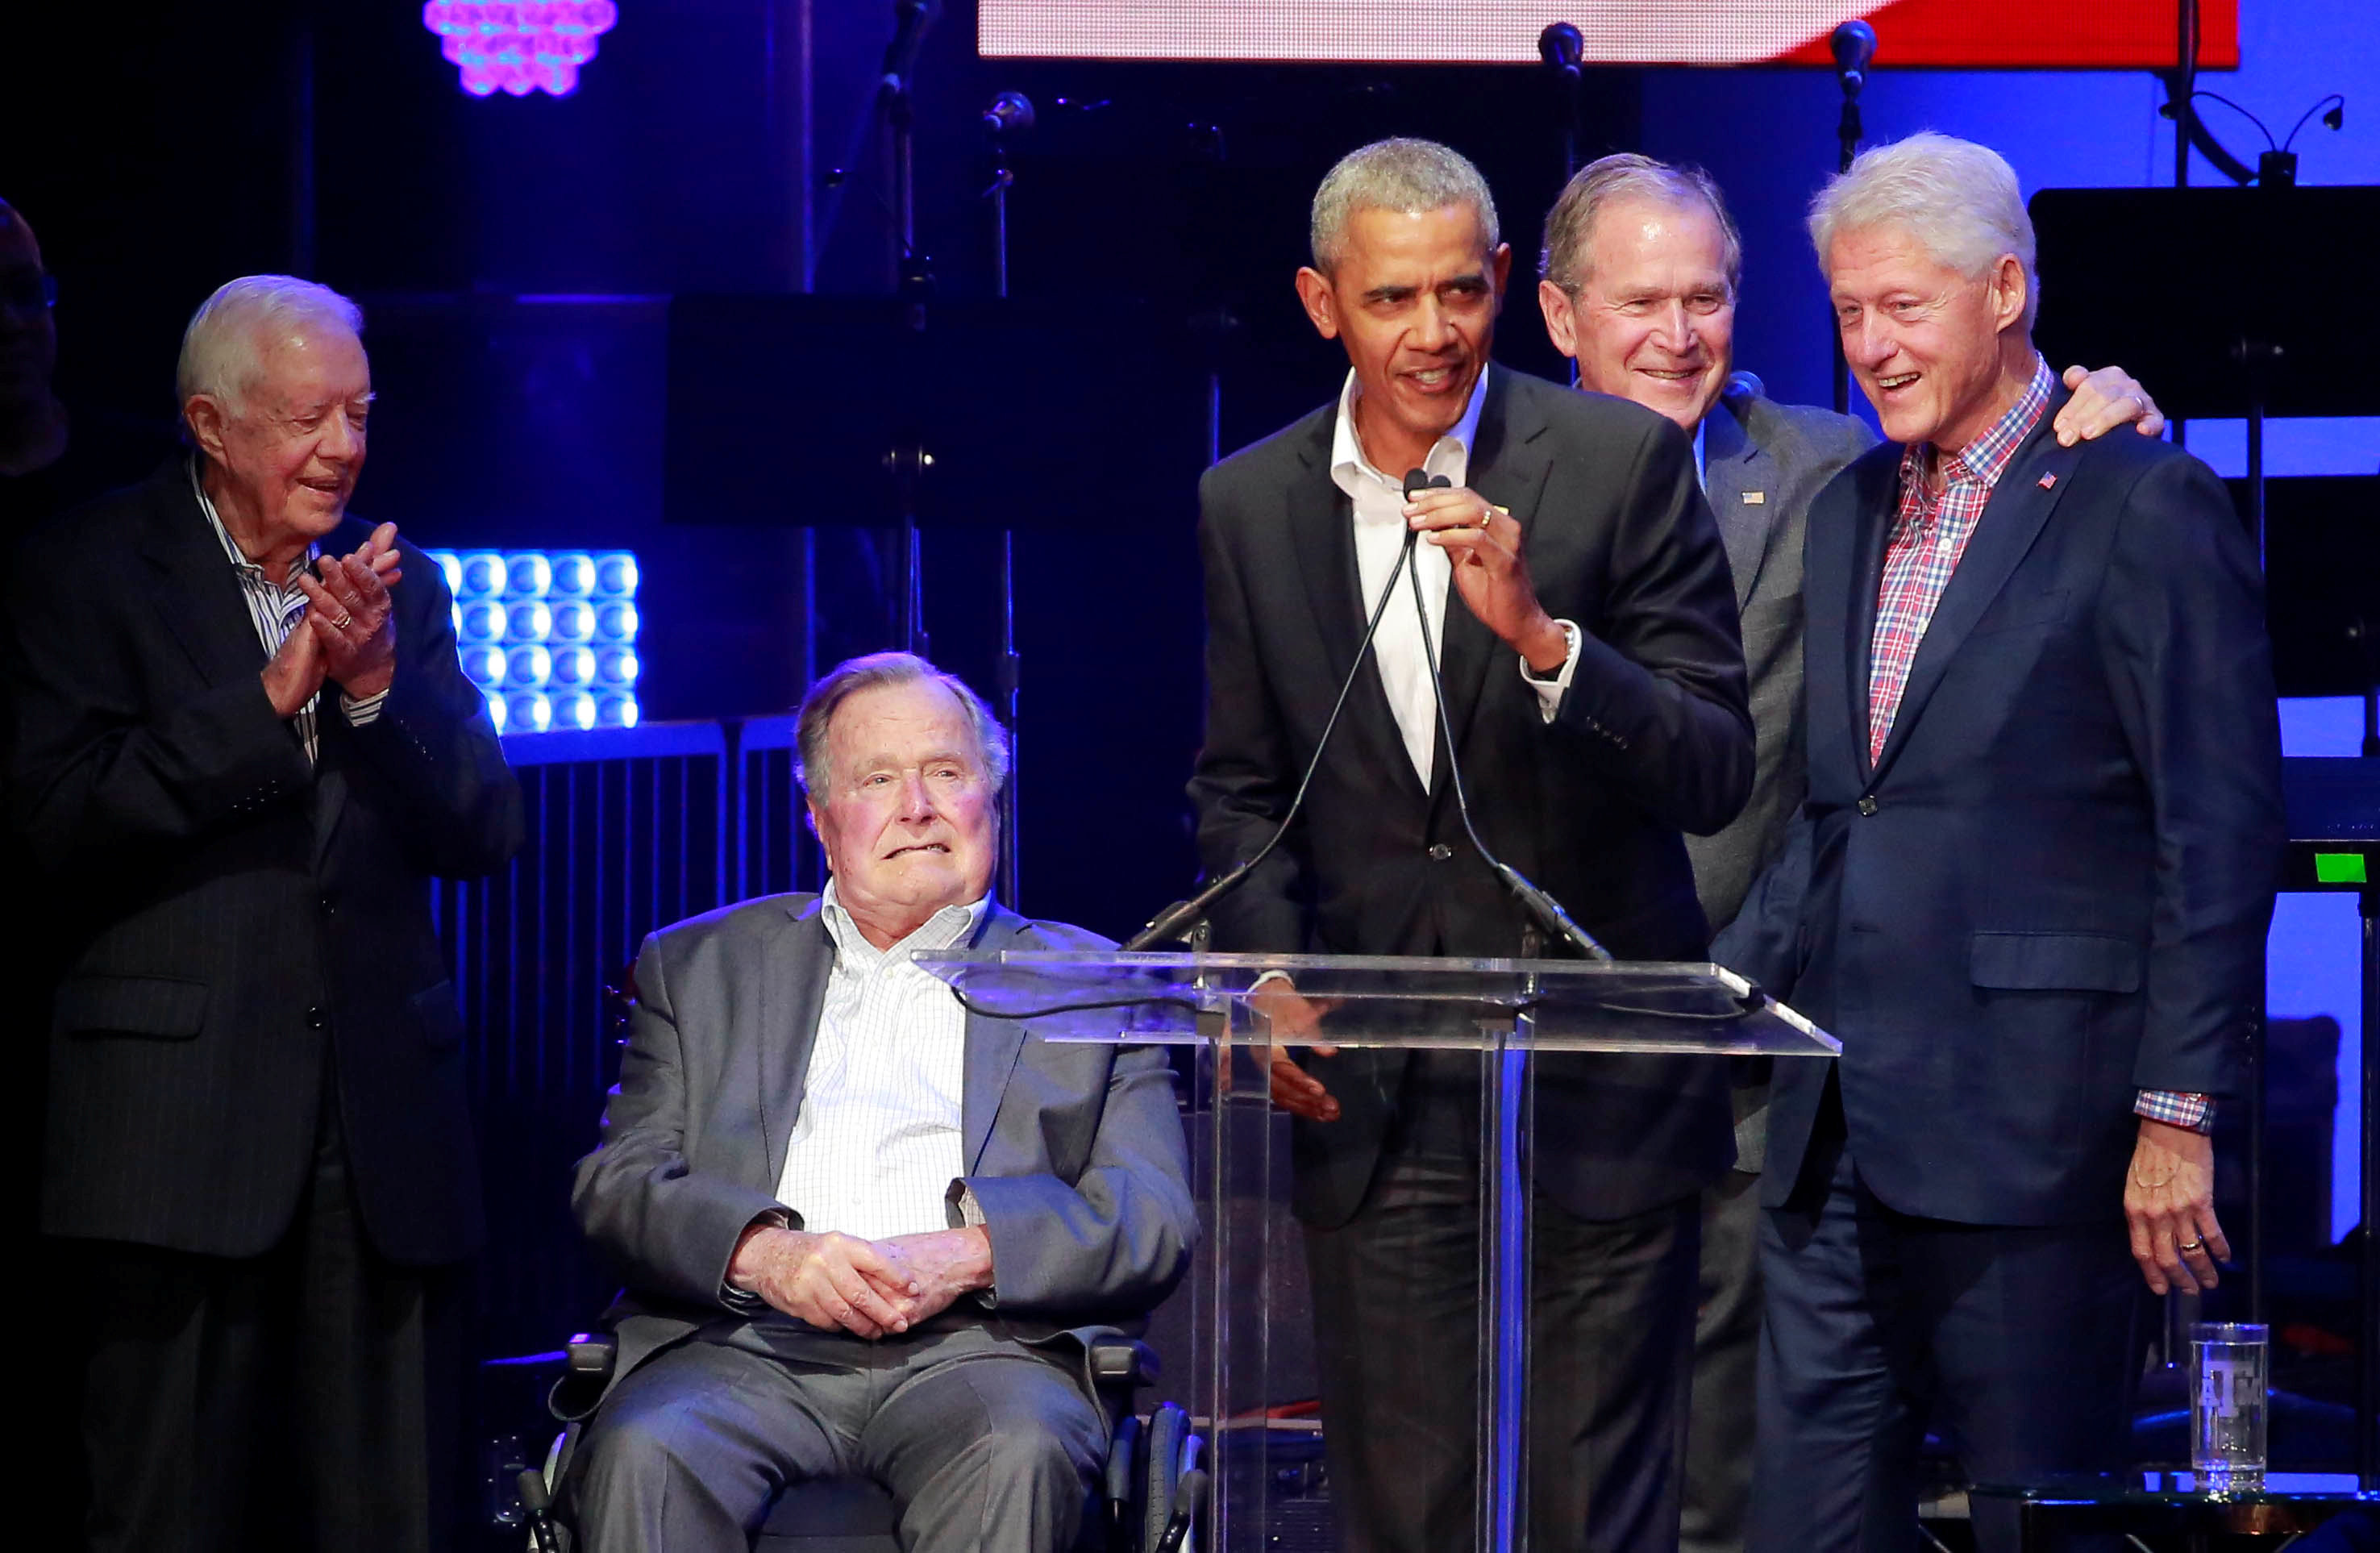 In Pictures: Five former U.S. presidents gather to support hurricane relief efforts